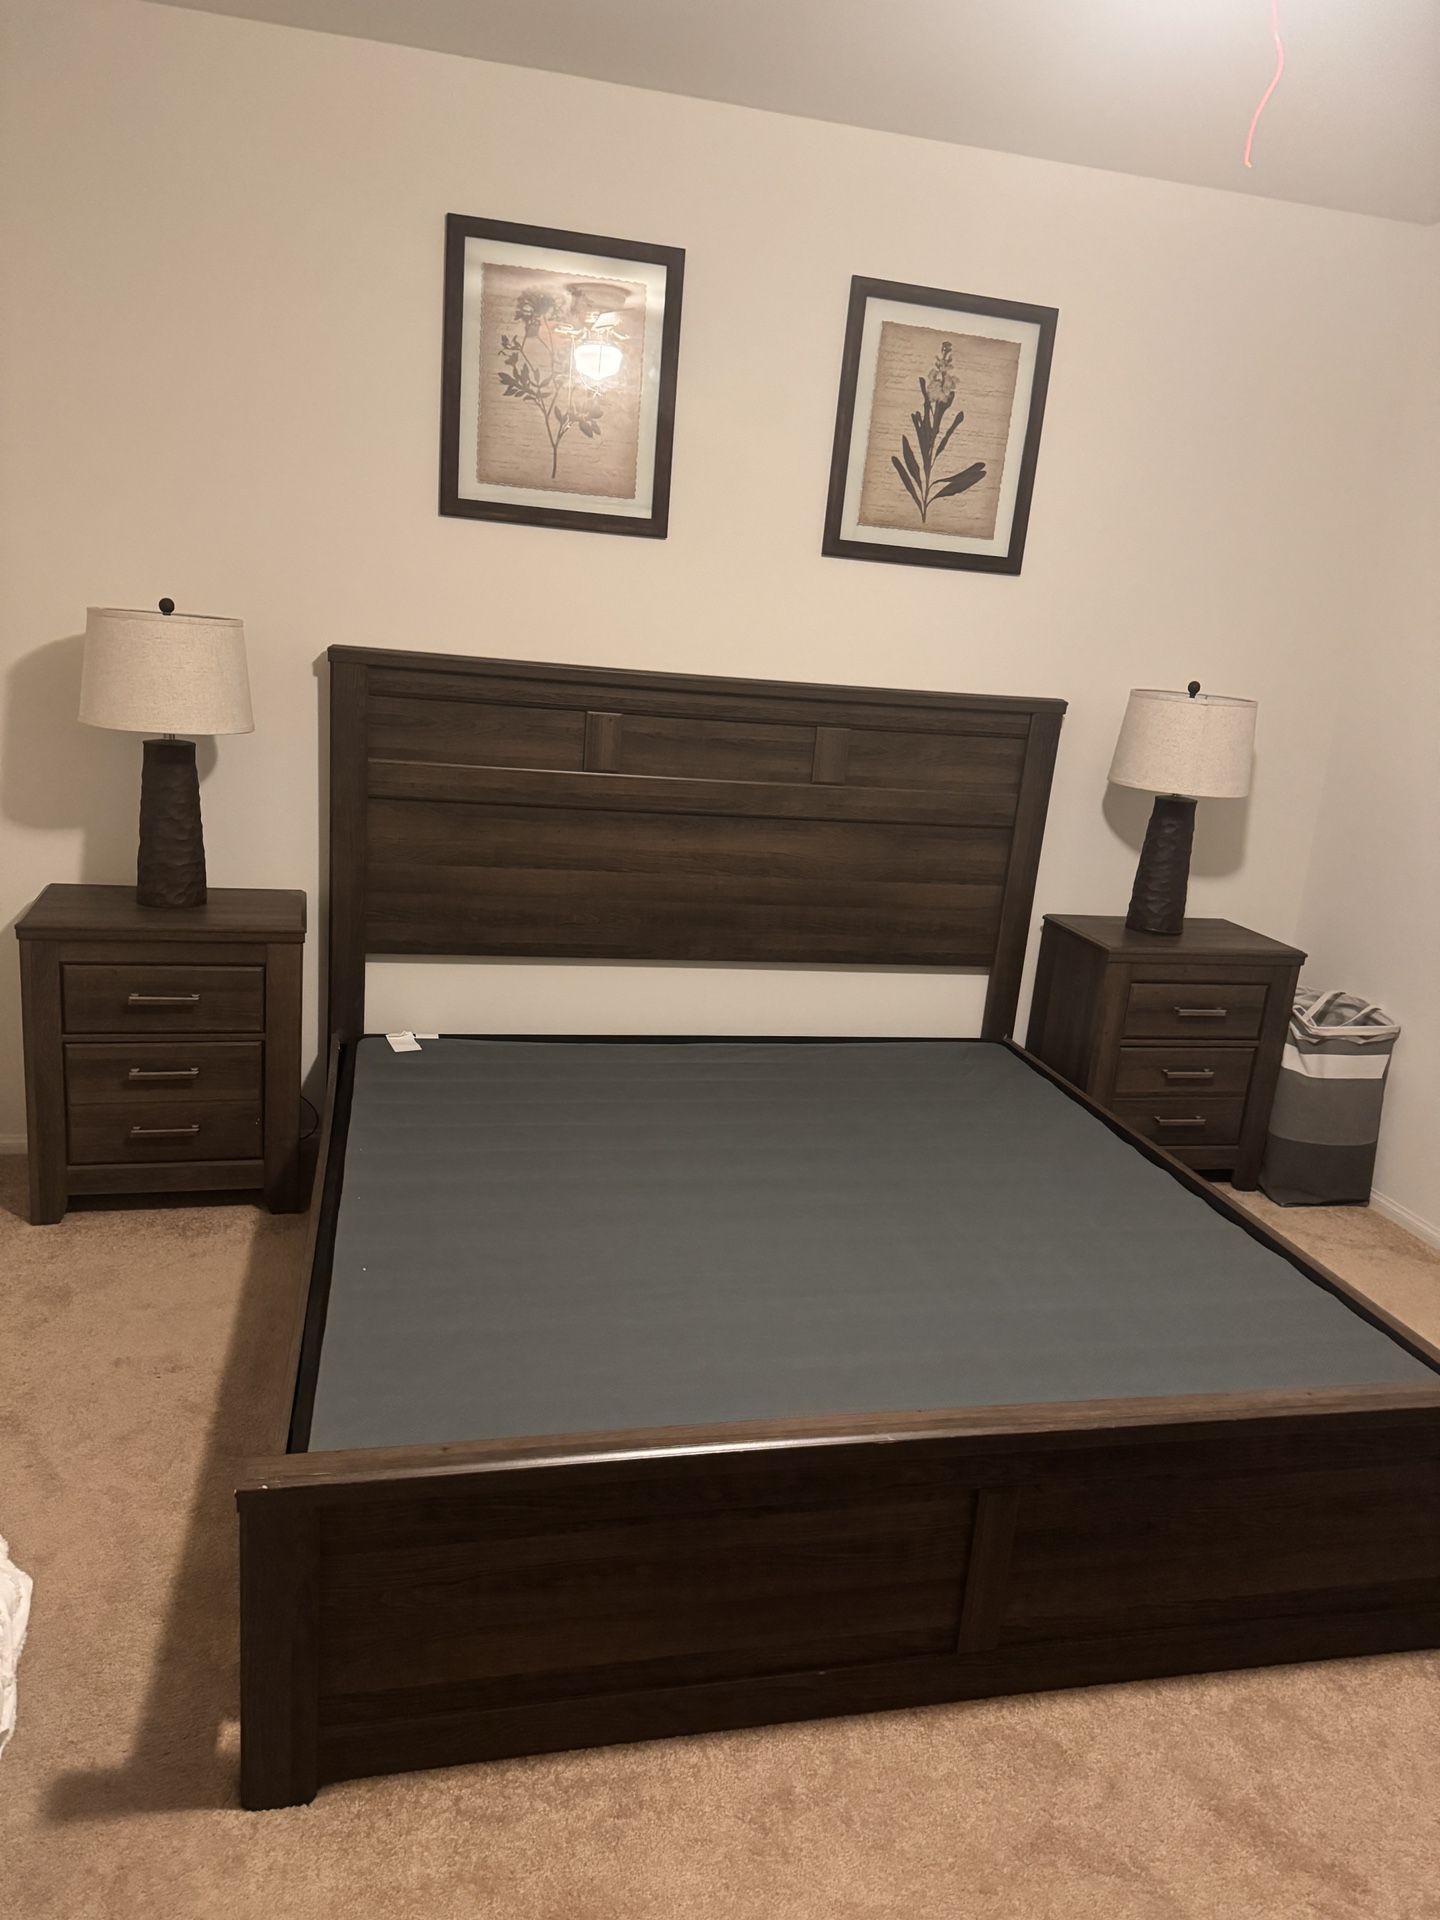 King Size Bed Frame With 2 Side Tables, Dresser & 2 Table Lamps